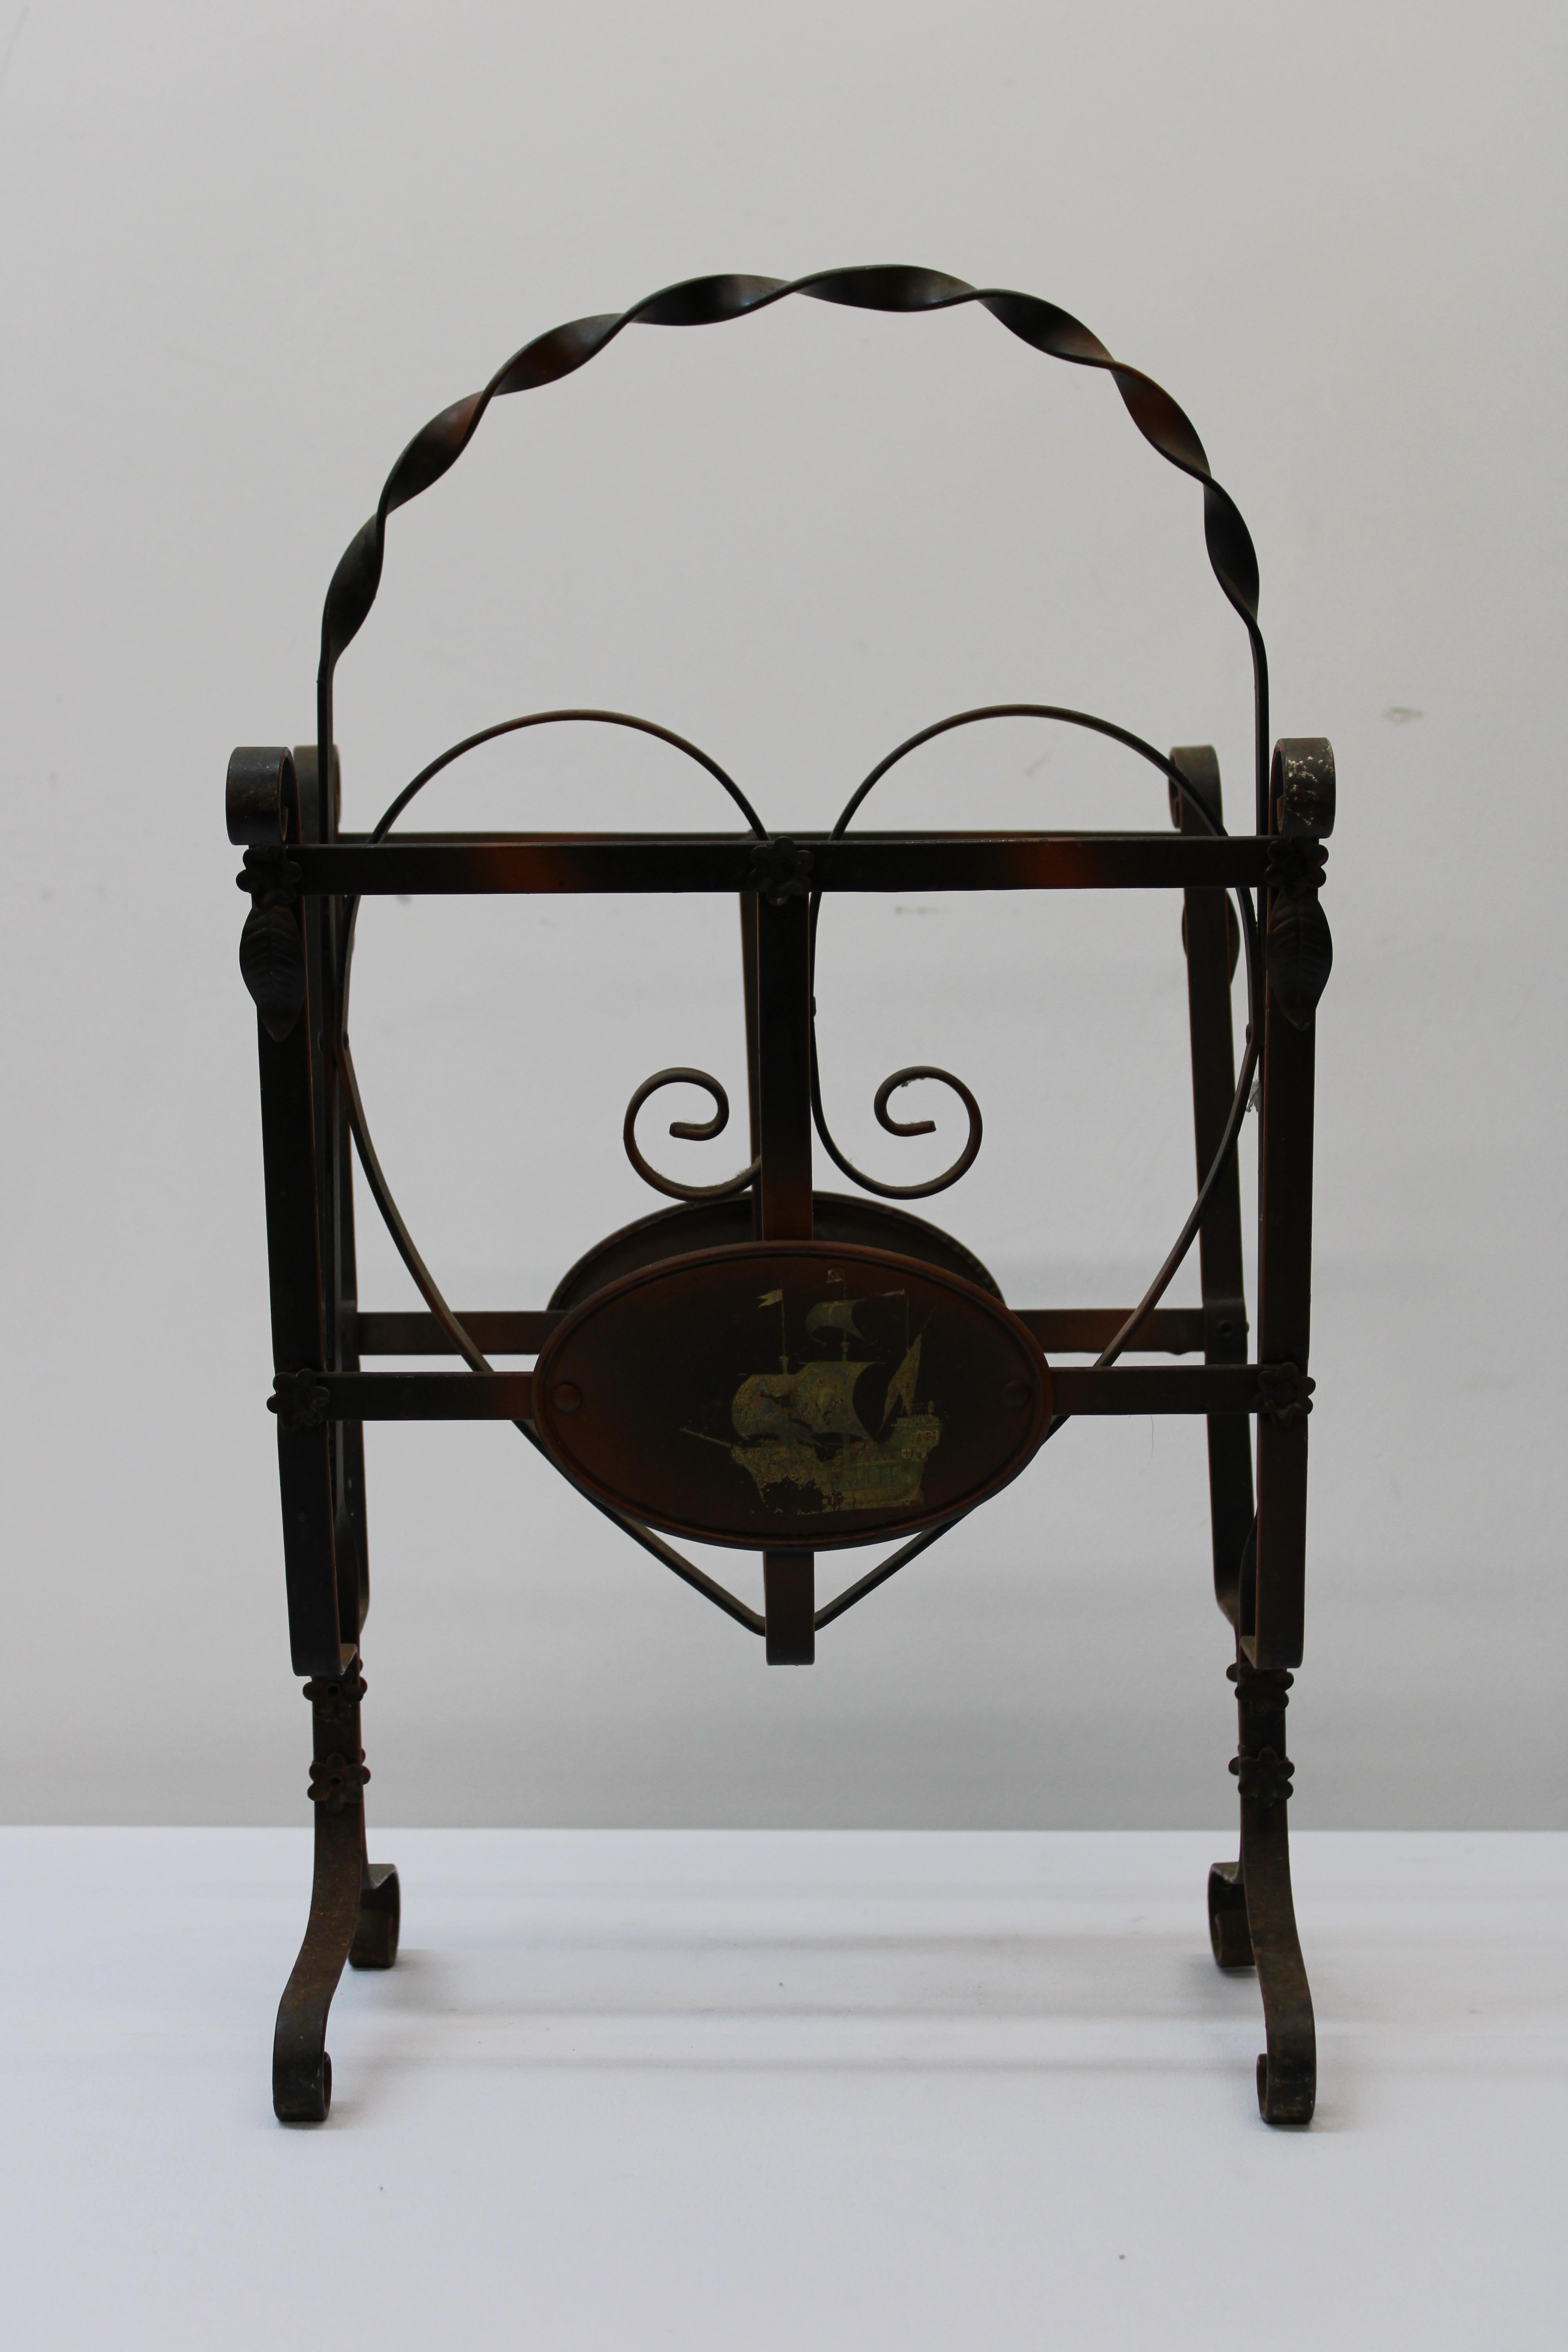 C. 20th century

1940's style wrought iron magazine stand w/ heart design & hand painted clipper ships.